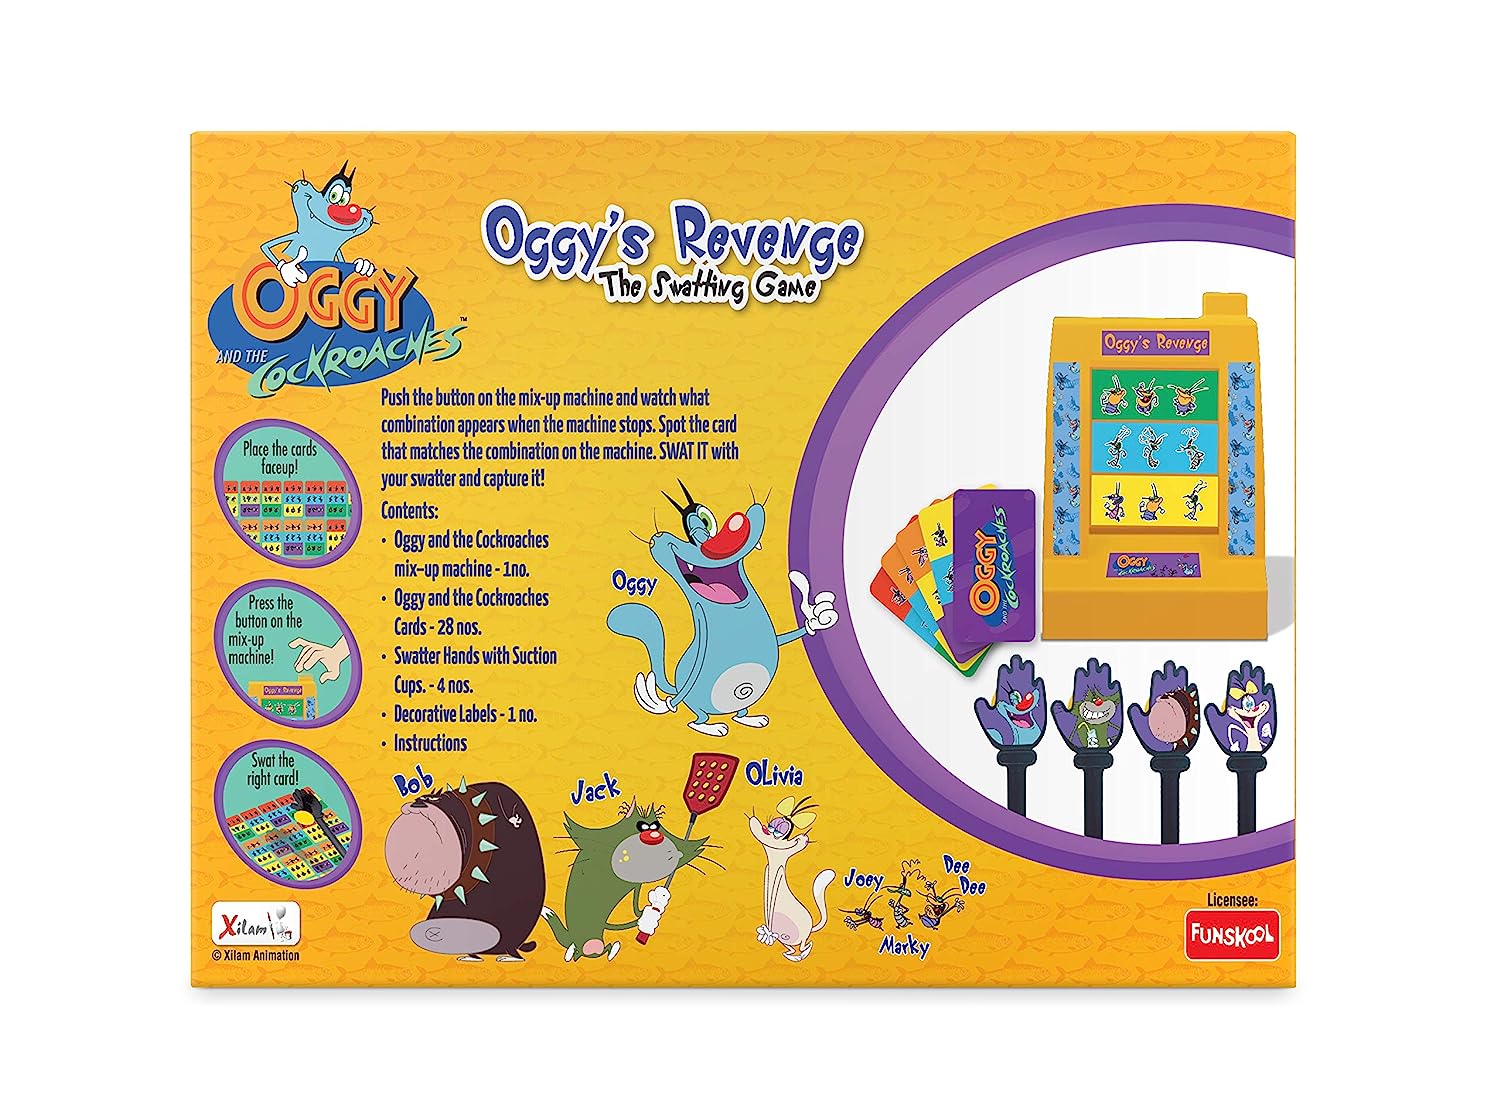 Funskool Oggy's Revenge, The Swatting Game, Family Entertainment Game, Kids and Family, 2-4 Players